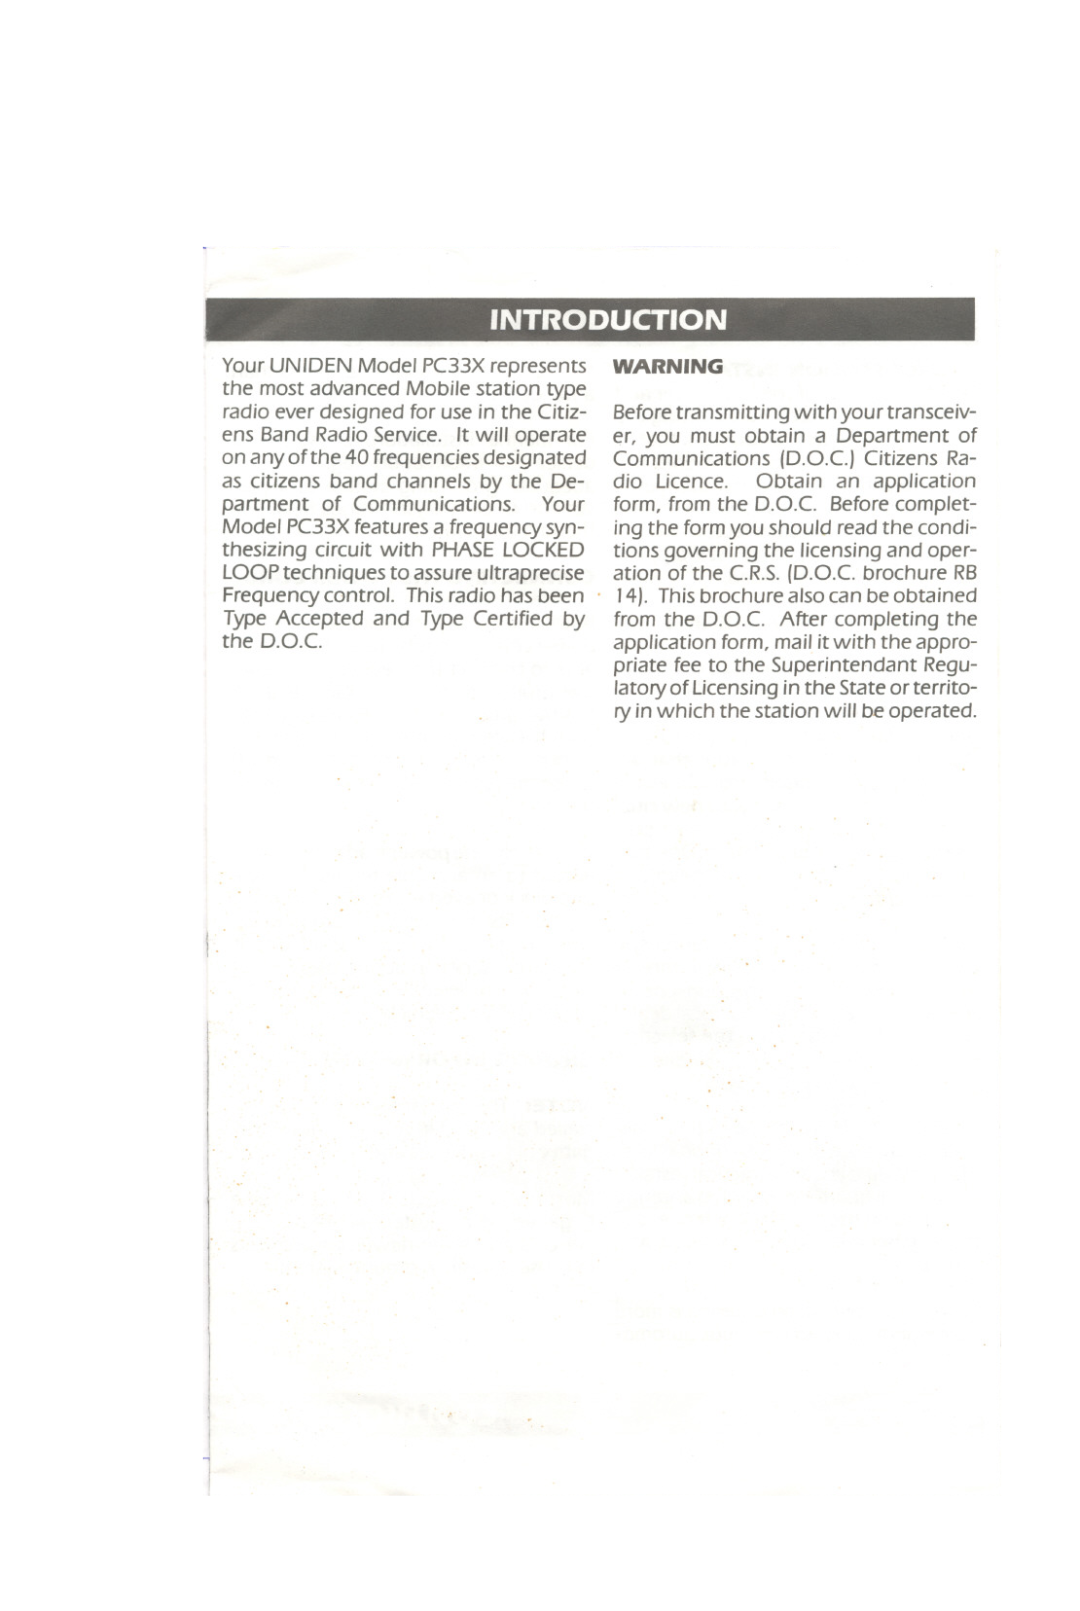 Uniden PC33X manual Introduction, from the D.O.C. After completing the 